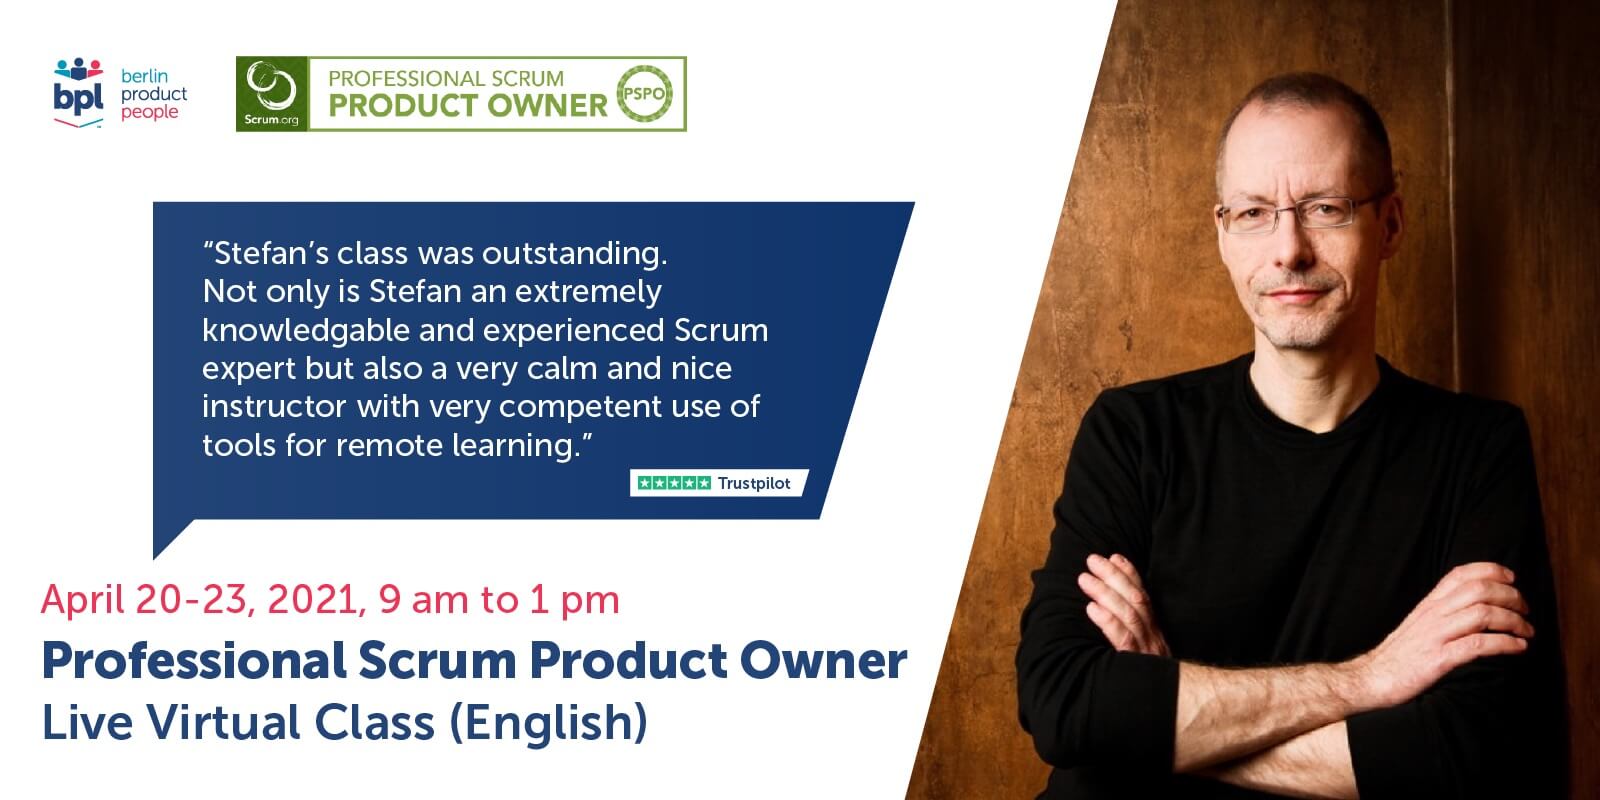 PSPO Professional Scrum Product Owner Online training class in April 2021 — Berlin Product People GmbH